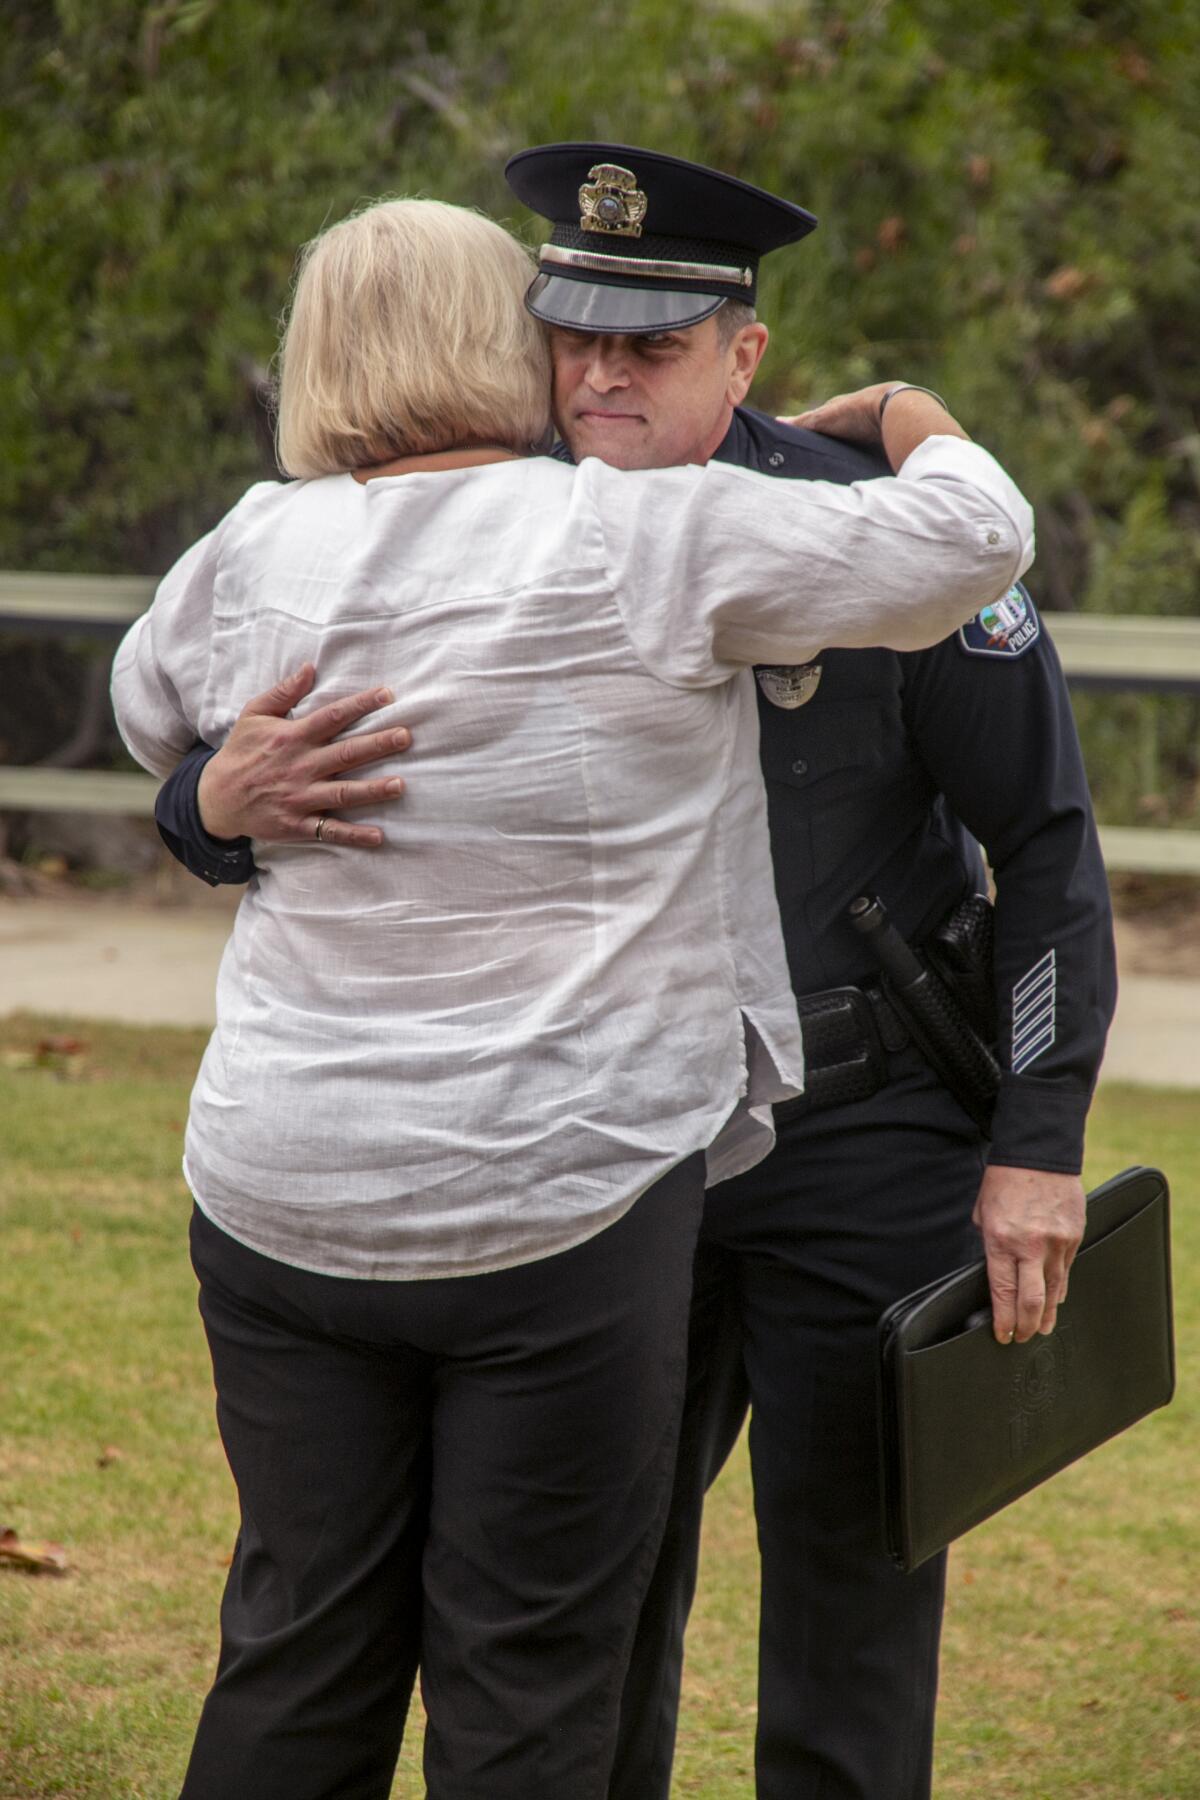 After his speech about her son, Laguna Beach Police Chief Jeff Calvert receives a hug from Officer Jon Coutchie's mother.